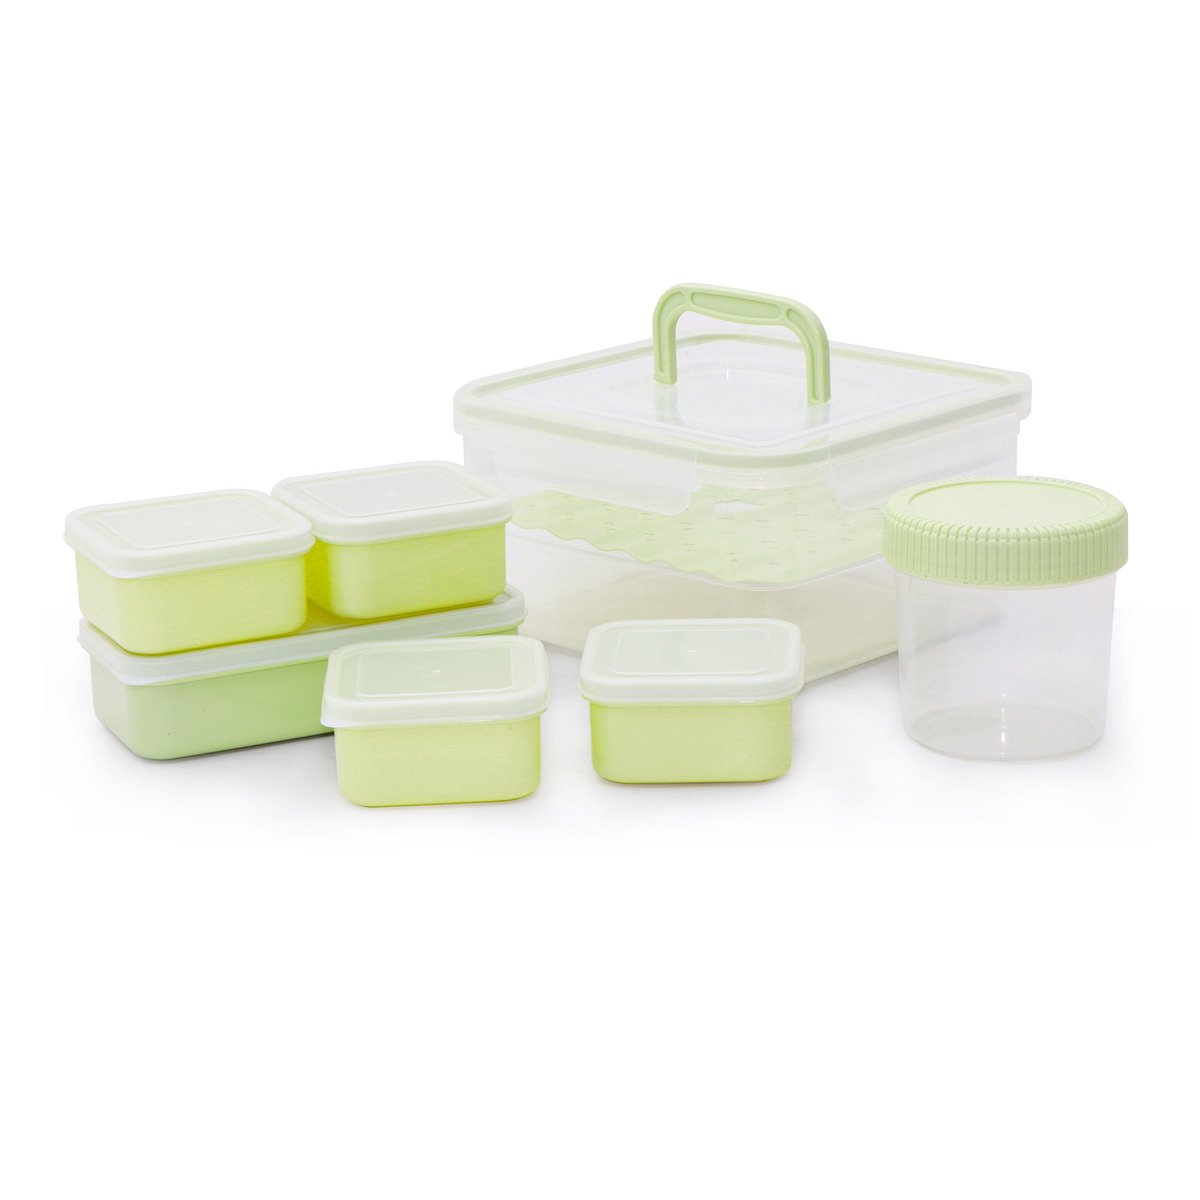 Home Food Container 1050 7pcs Assorted Color